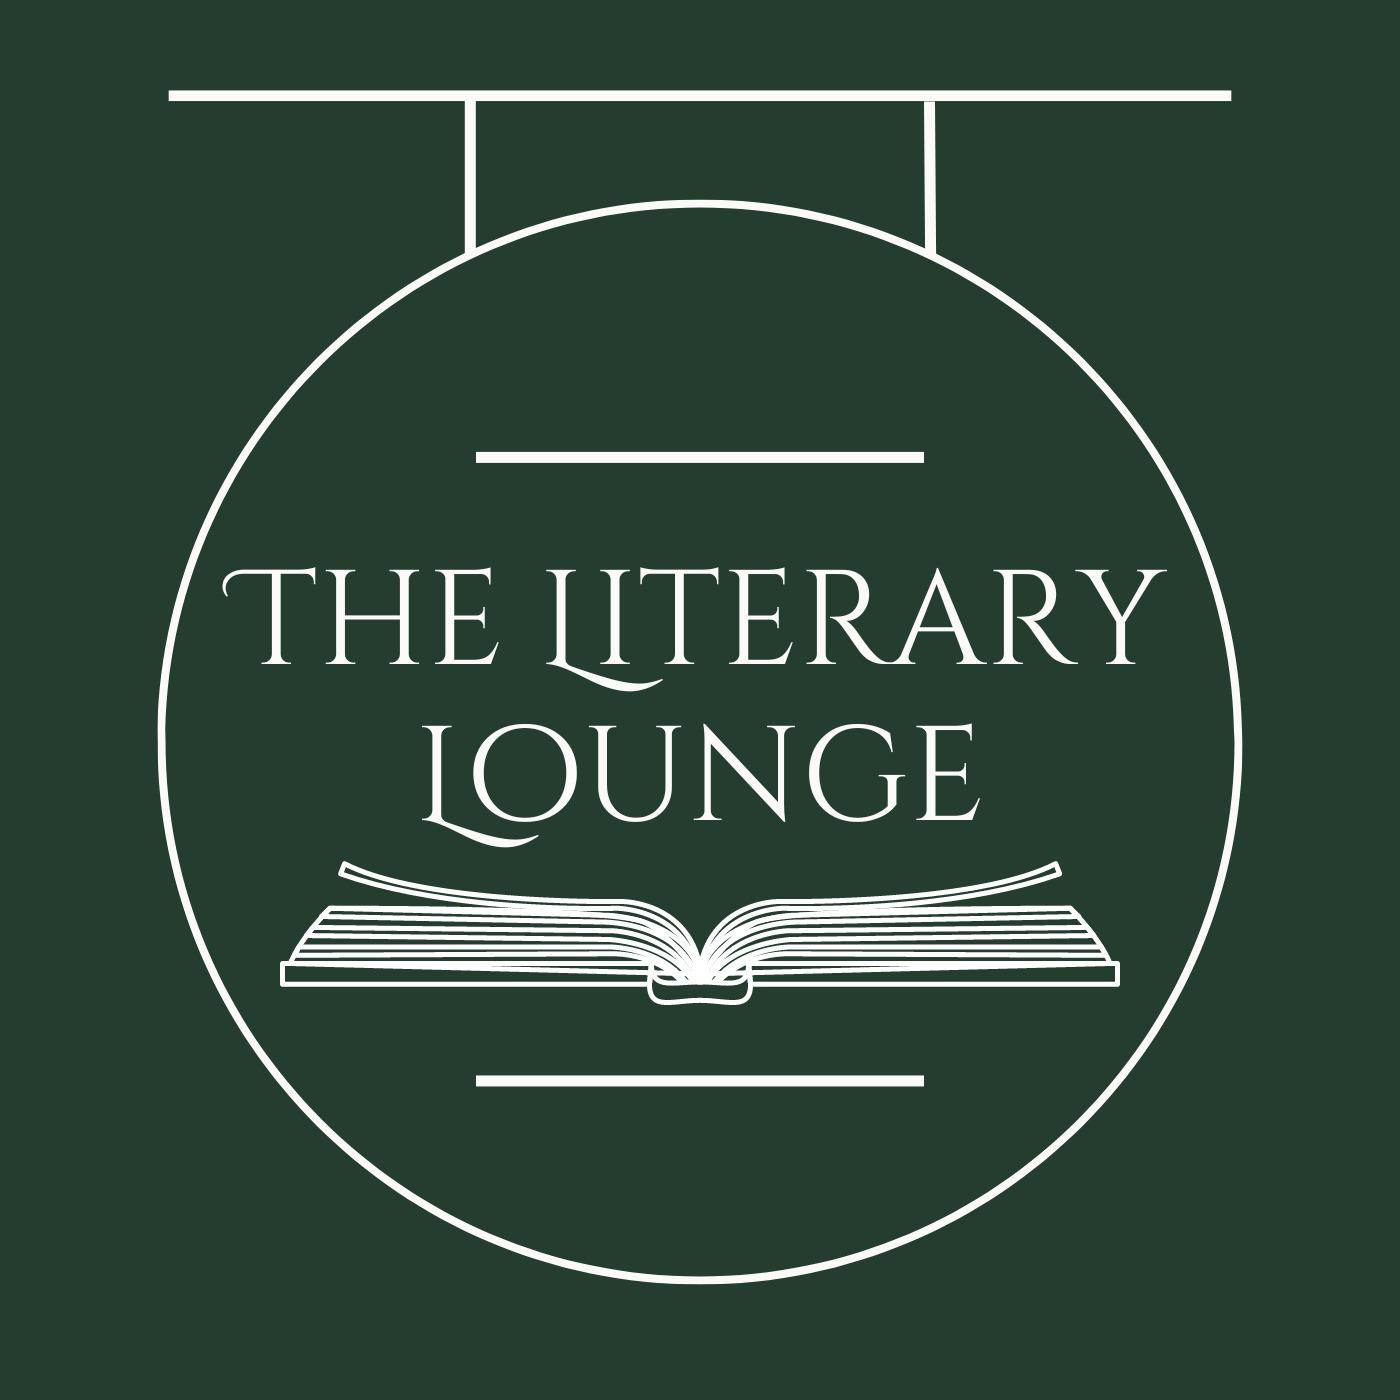 The Literary Lounge